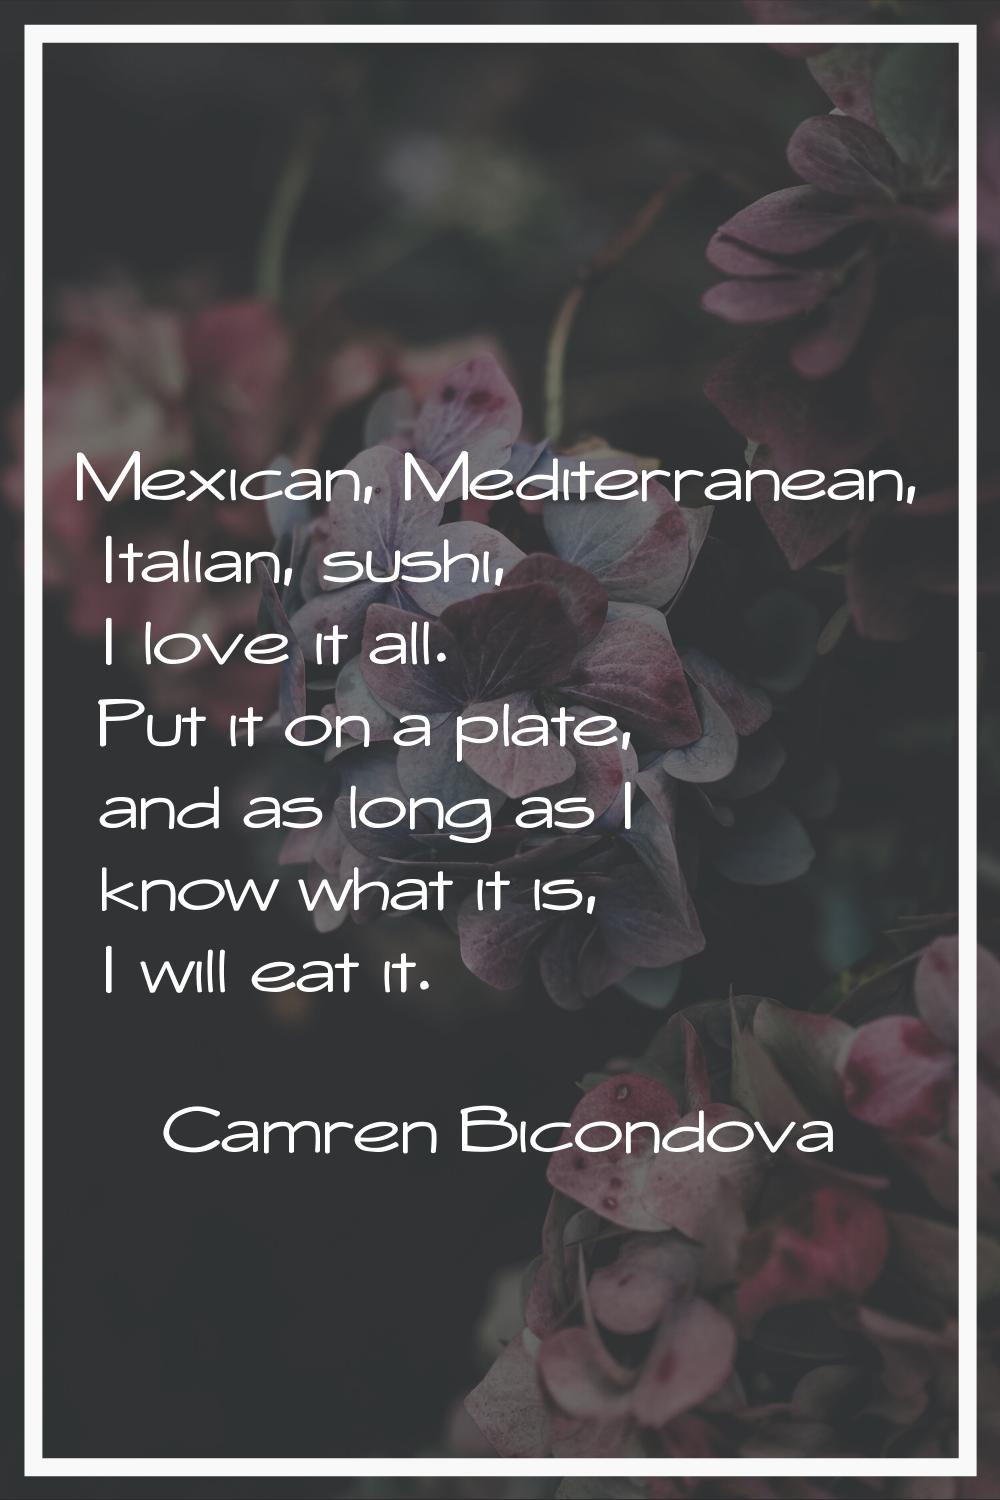 Mexican, Mediterranean, Italian, sushi, I love it all. Put it on a plate, and as long as I know wha